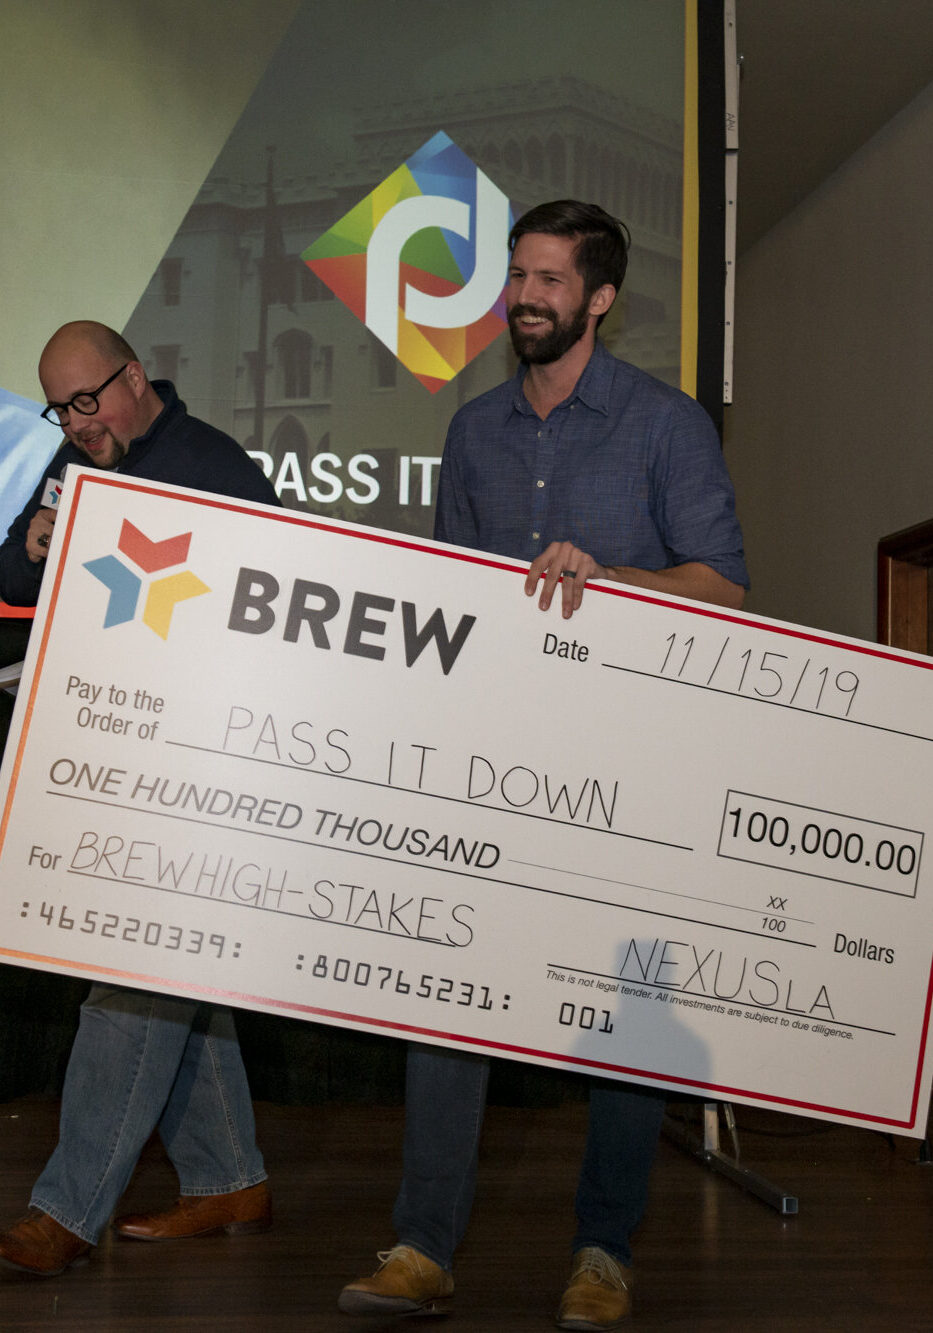 BREW is BACK! - Baton Rouge Entrepreneurship Week will be live and in-person this March. BREW 11 wants to help local entrepreneurs chart a new course.